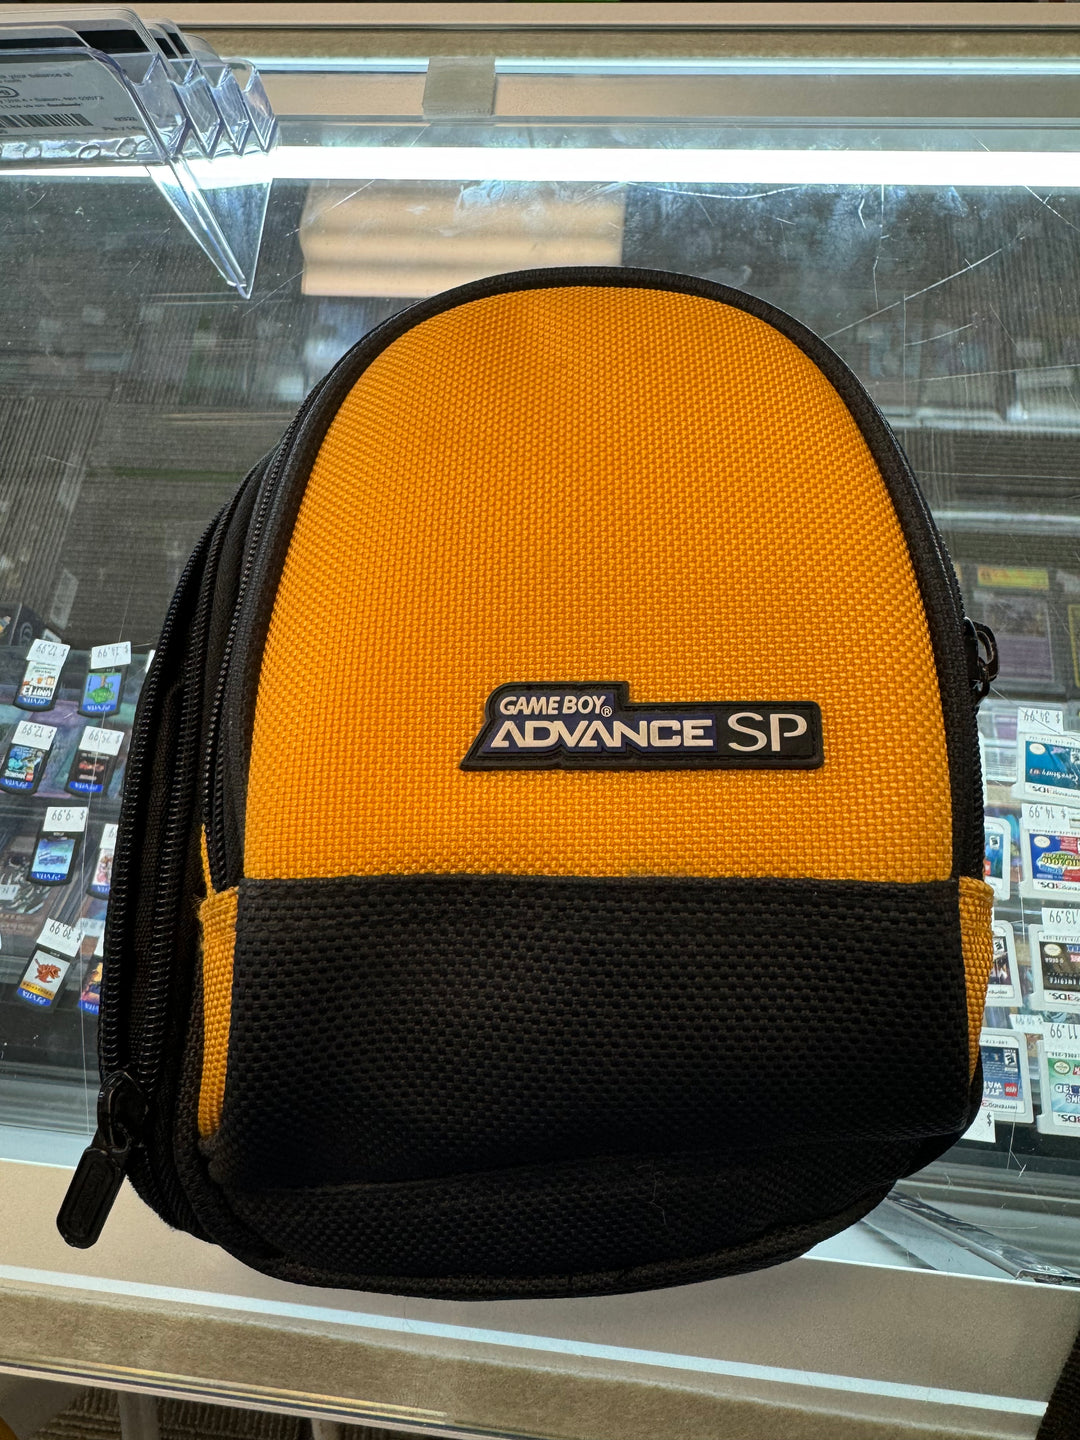 Gameboy Advance SP, Backpack Style Storage Case, Pre - Owned, Yellow / Orange m24